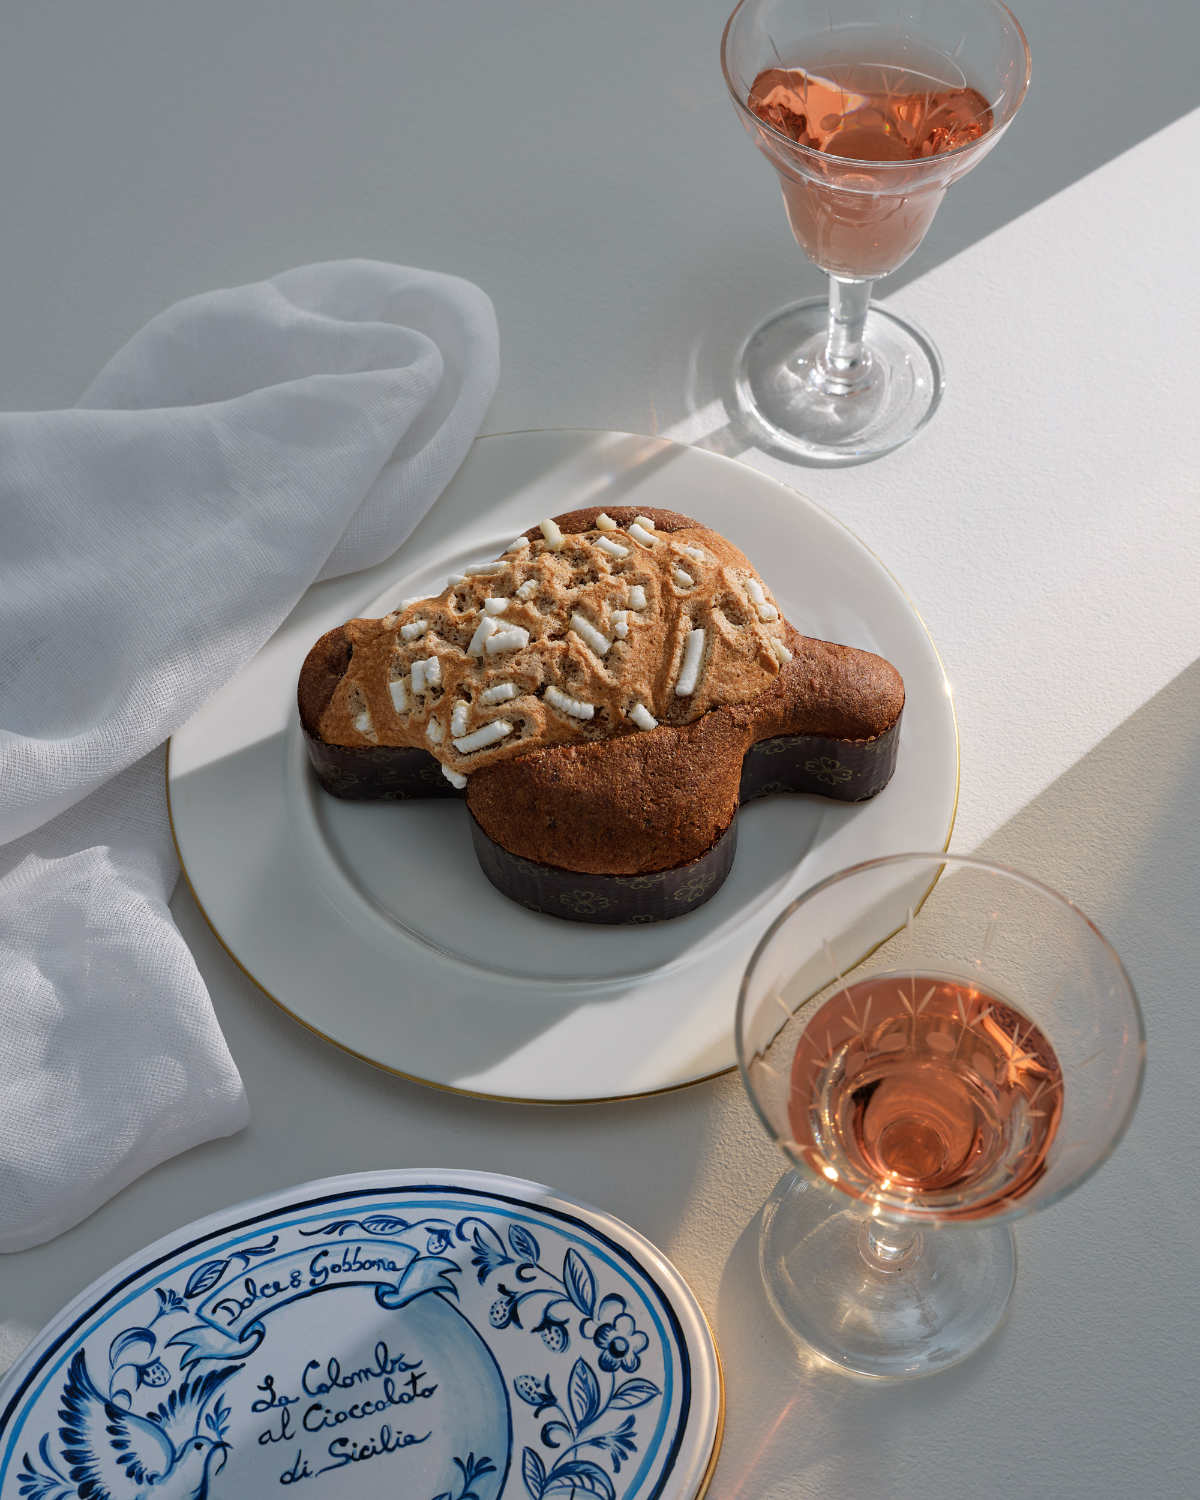 Colomba By Dolce&Gabbana And Fiasconaro - The New Speciality Pastry Of The Italian Tradition